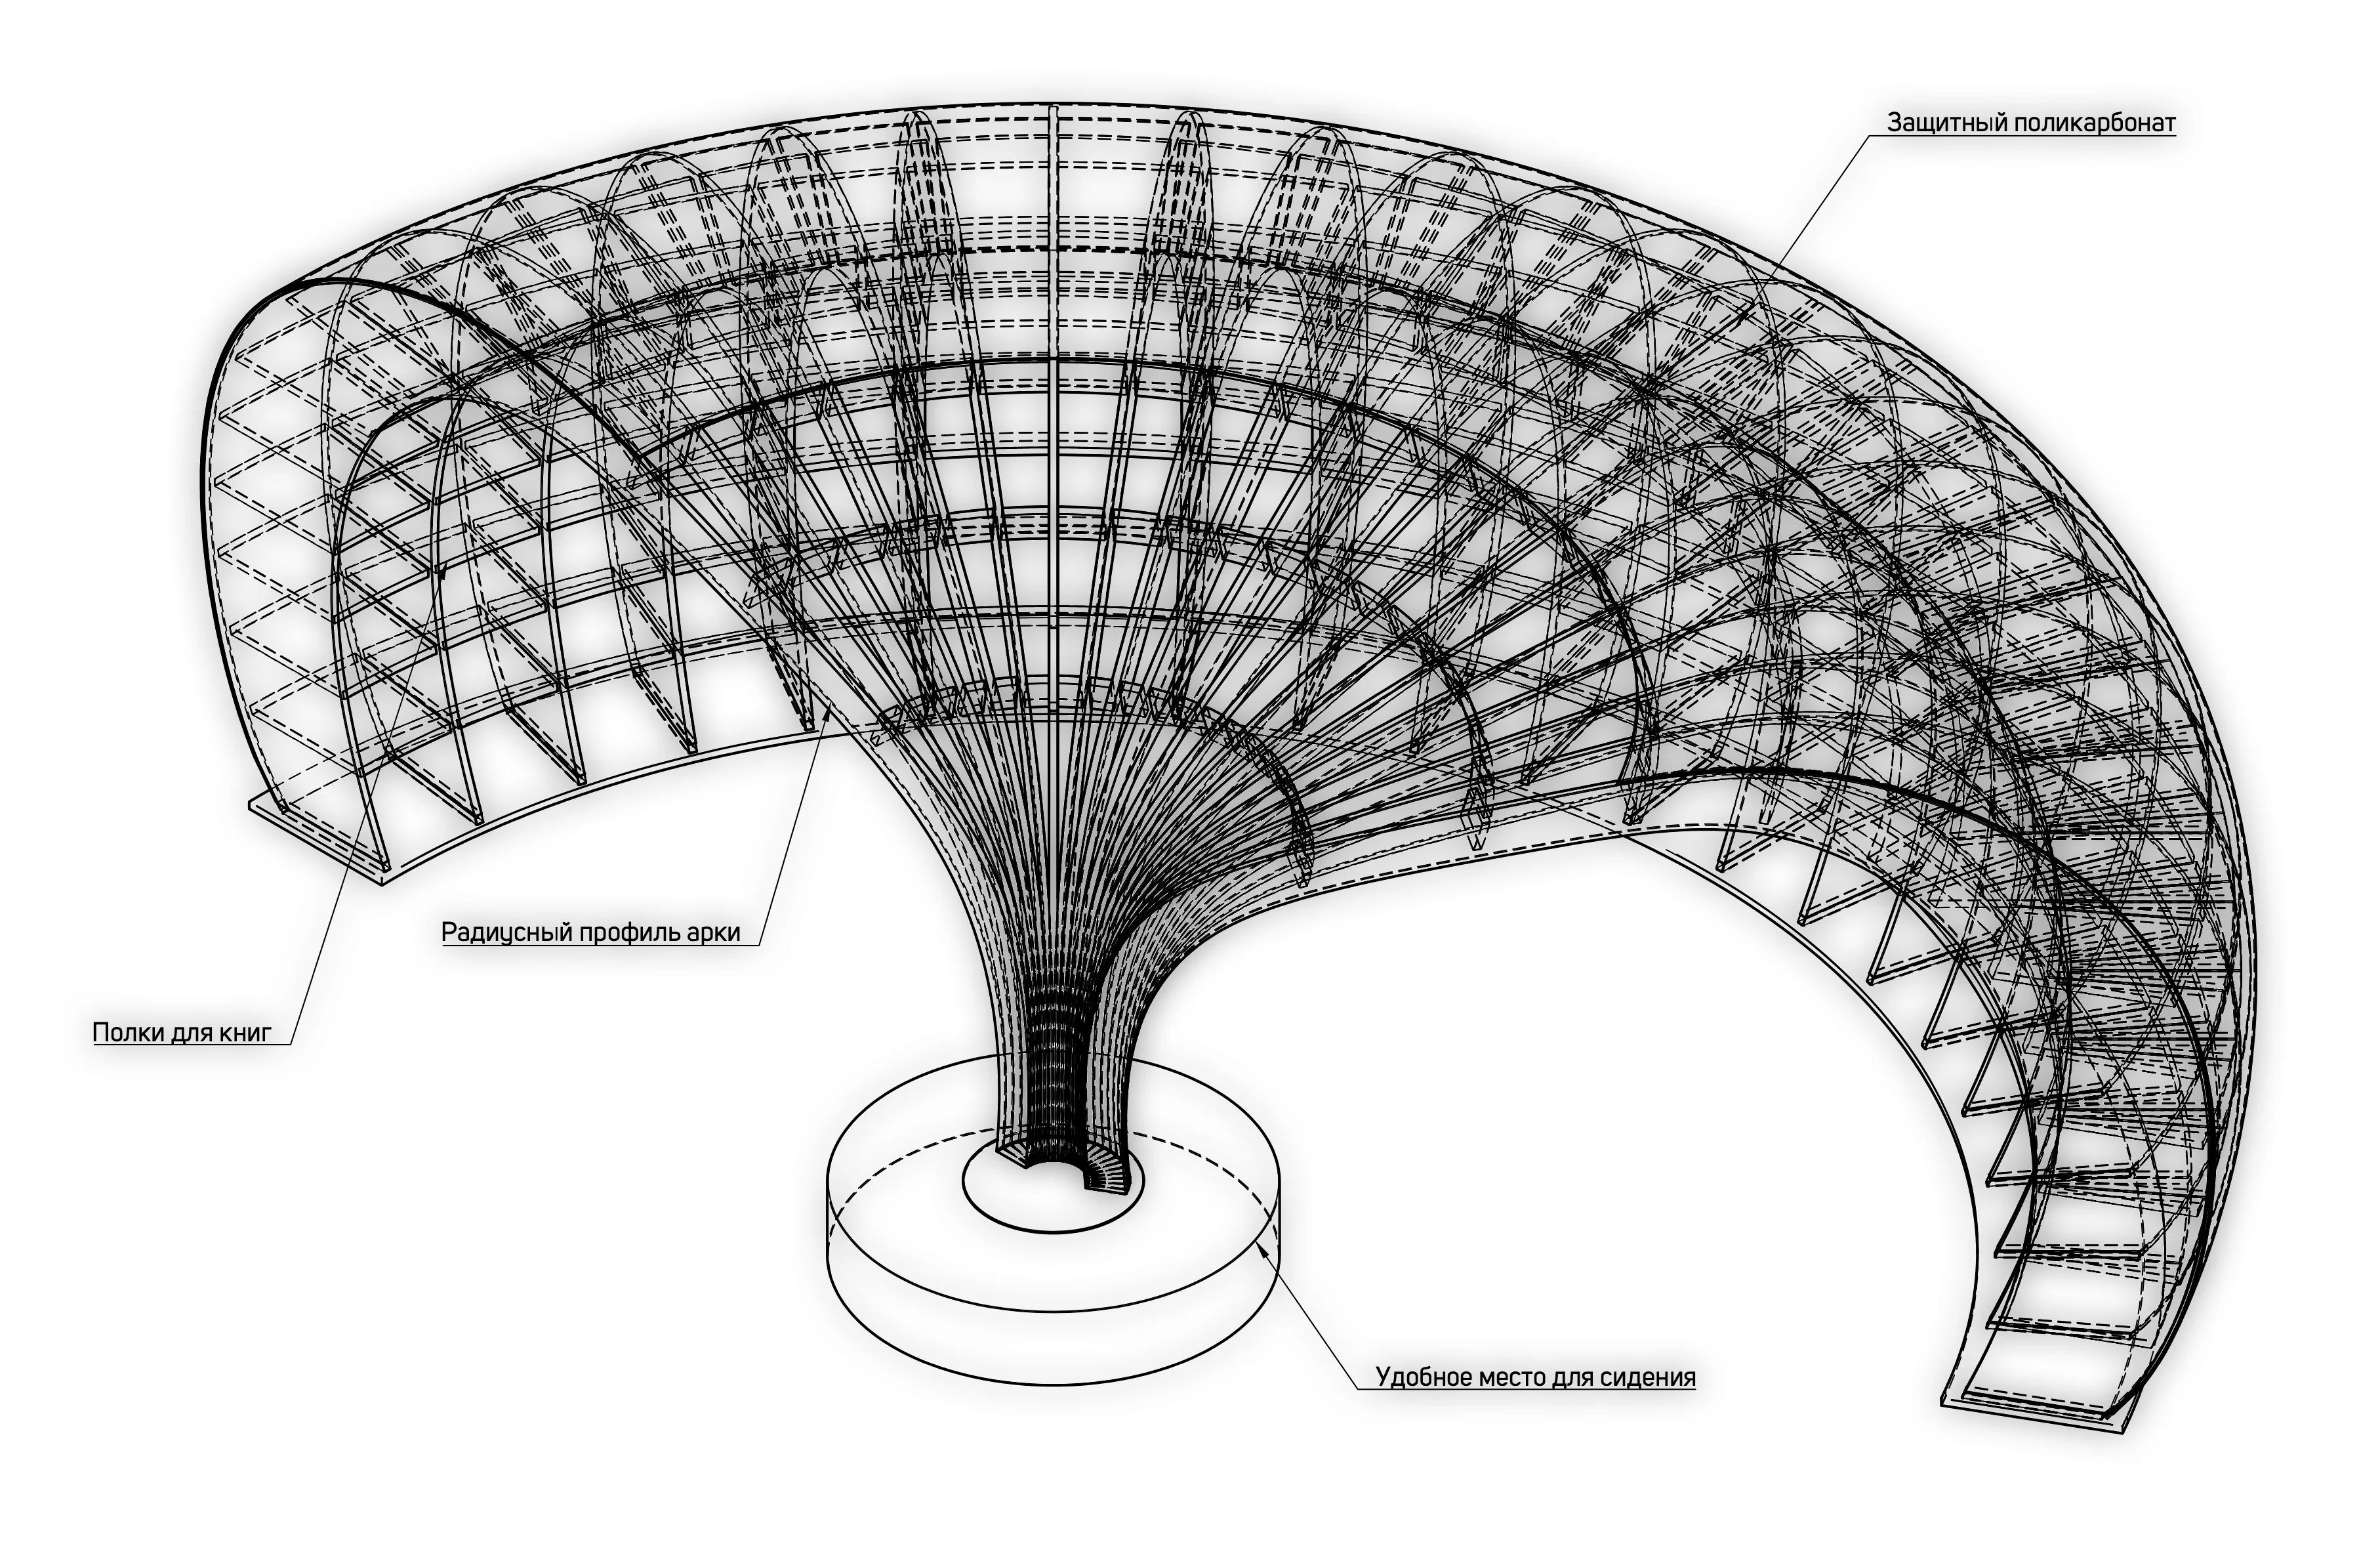 01 gallery of parametric design drawing v1